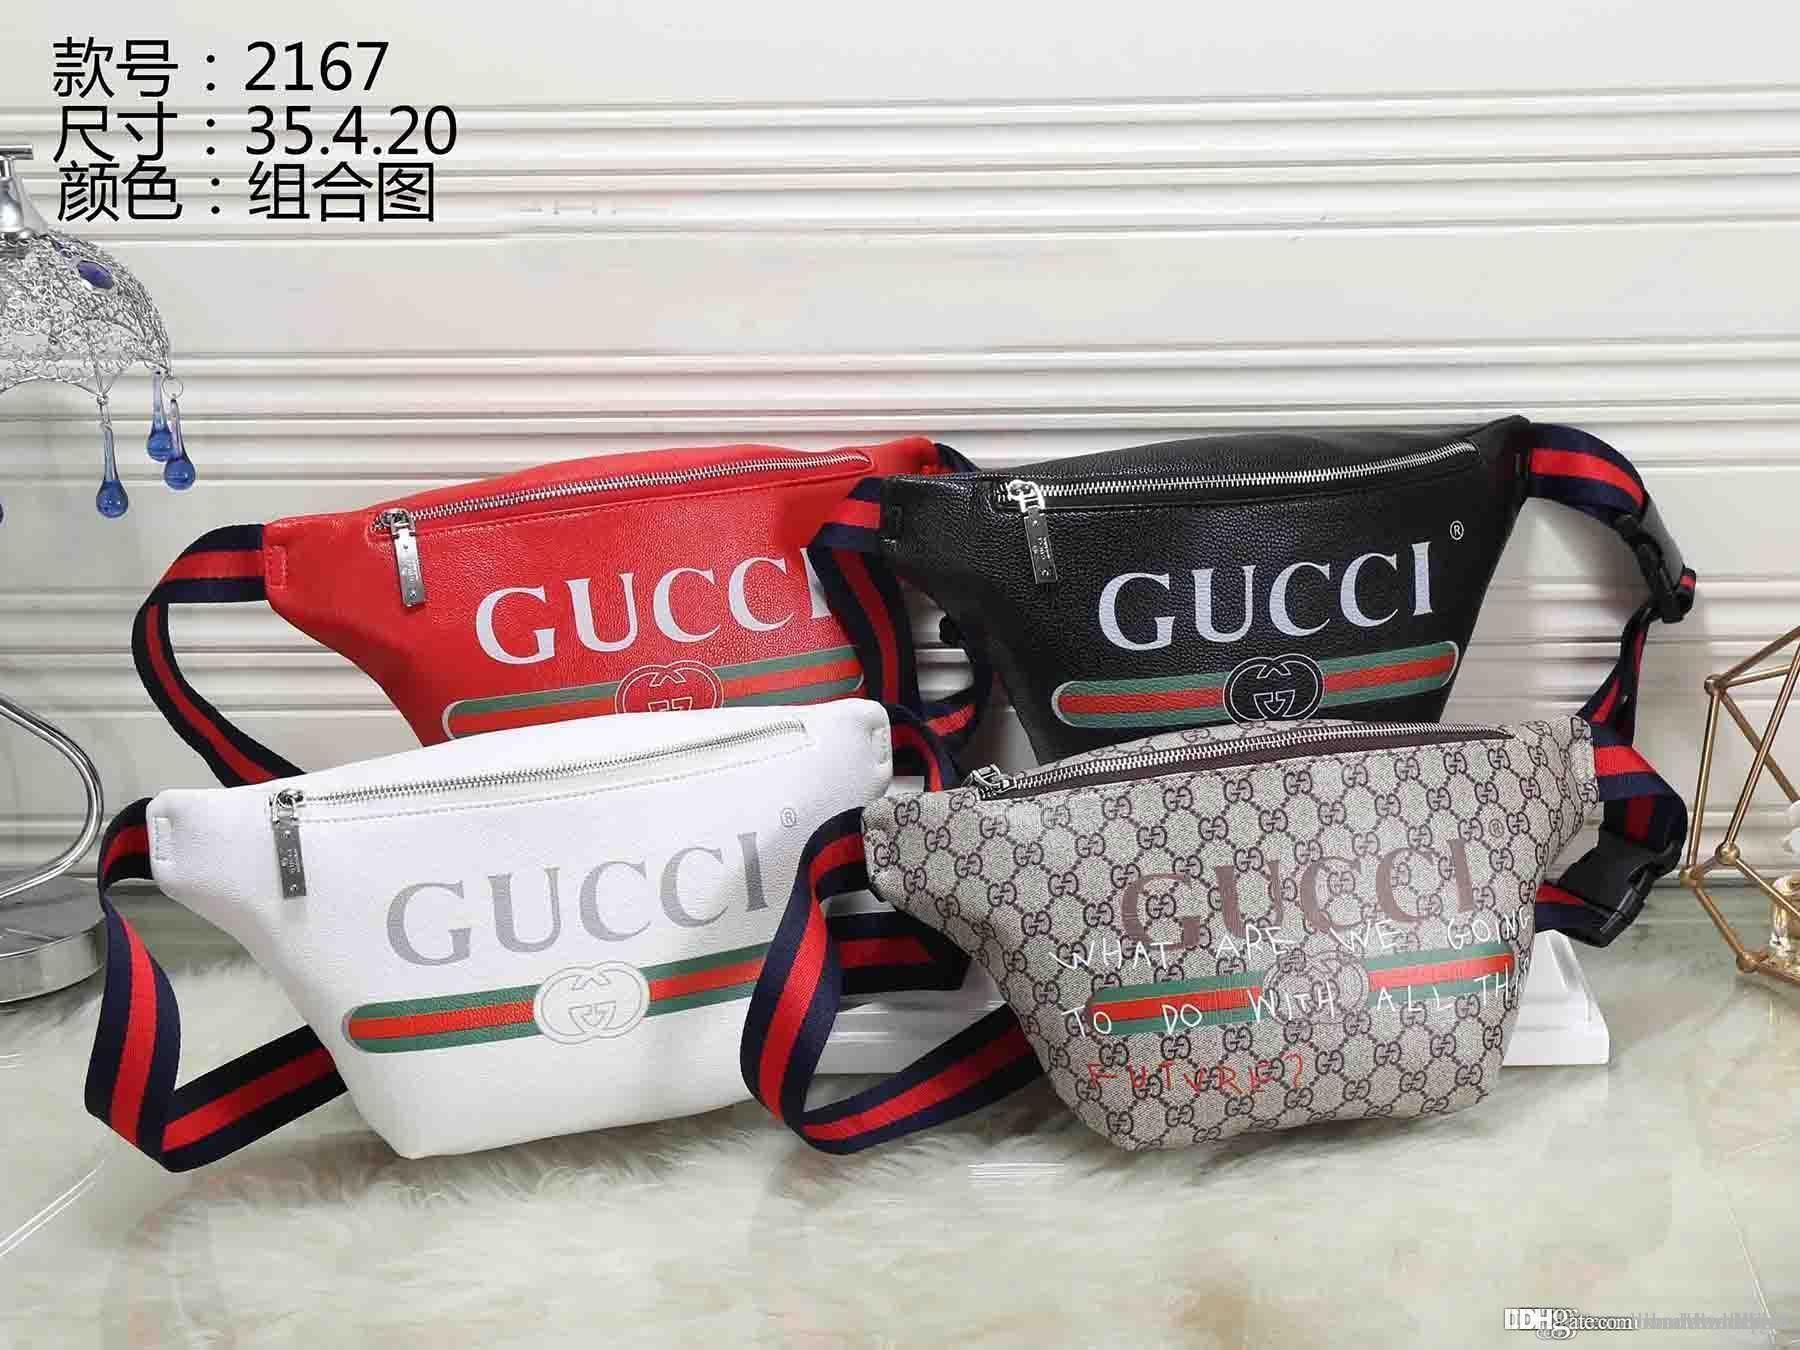 Gucci Purse Dhgate Italy, SAVE 38% 